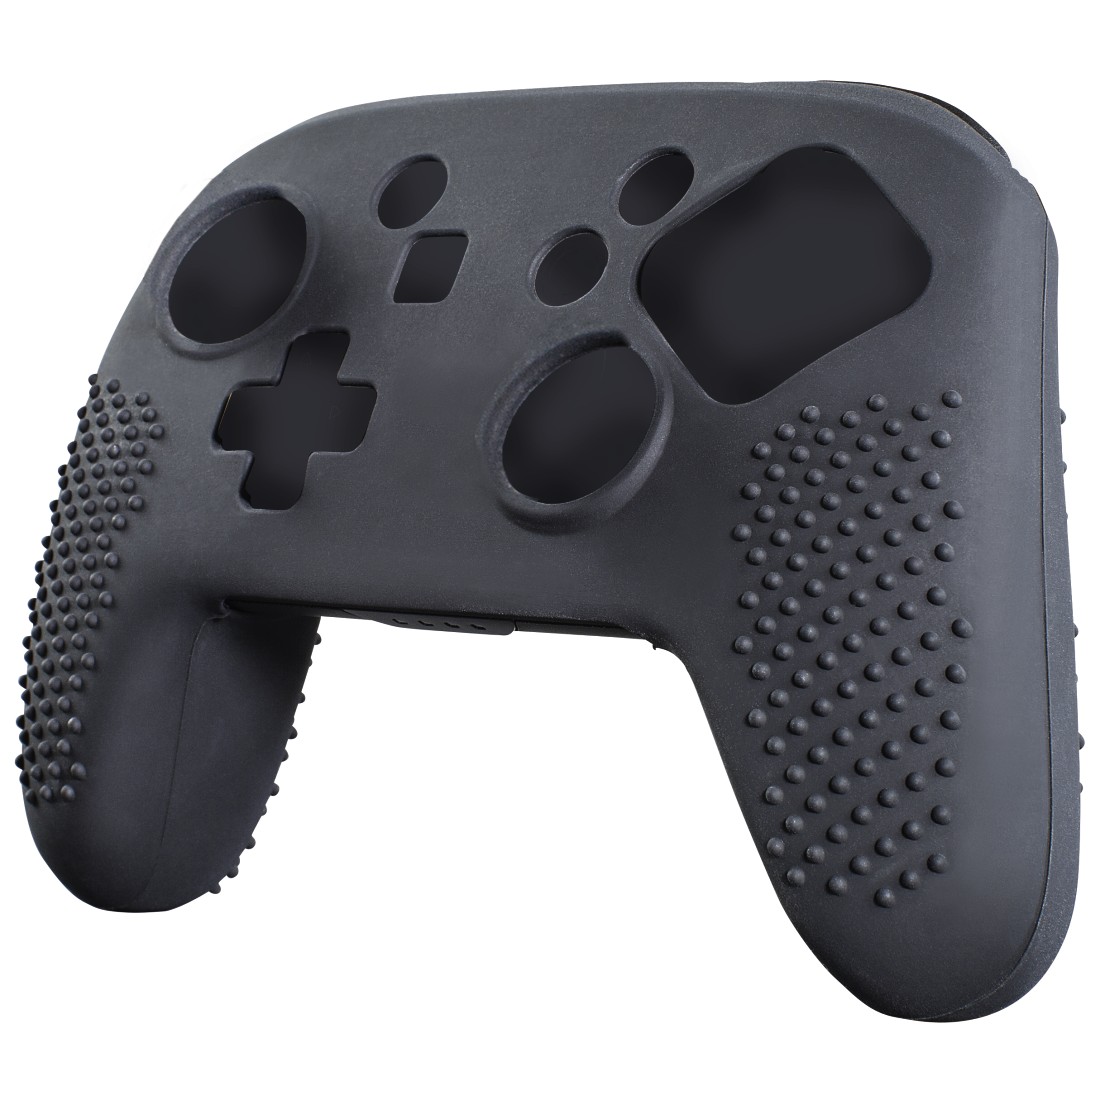 00054649 Hama 7-in-1 Accessories Package for Nintendo Switch Pro  Controller, black | hama.com